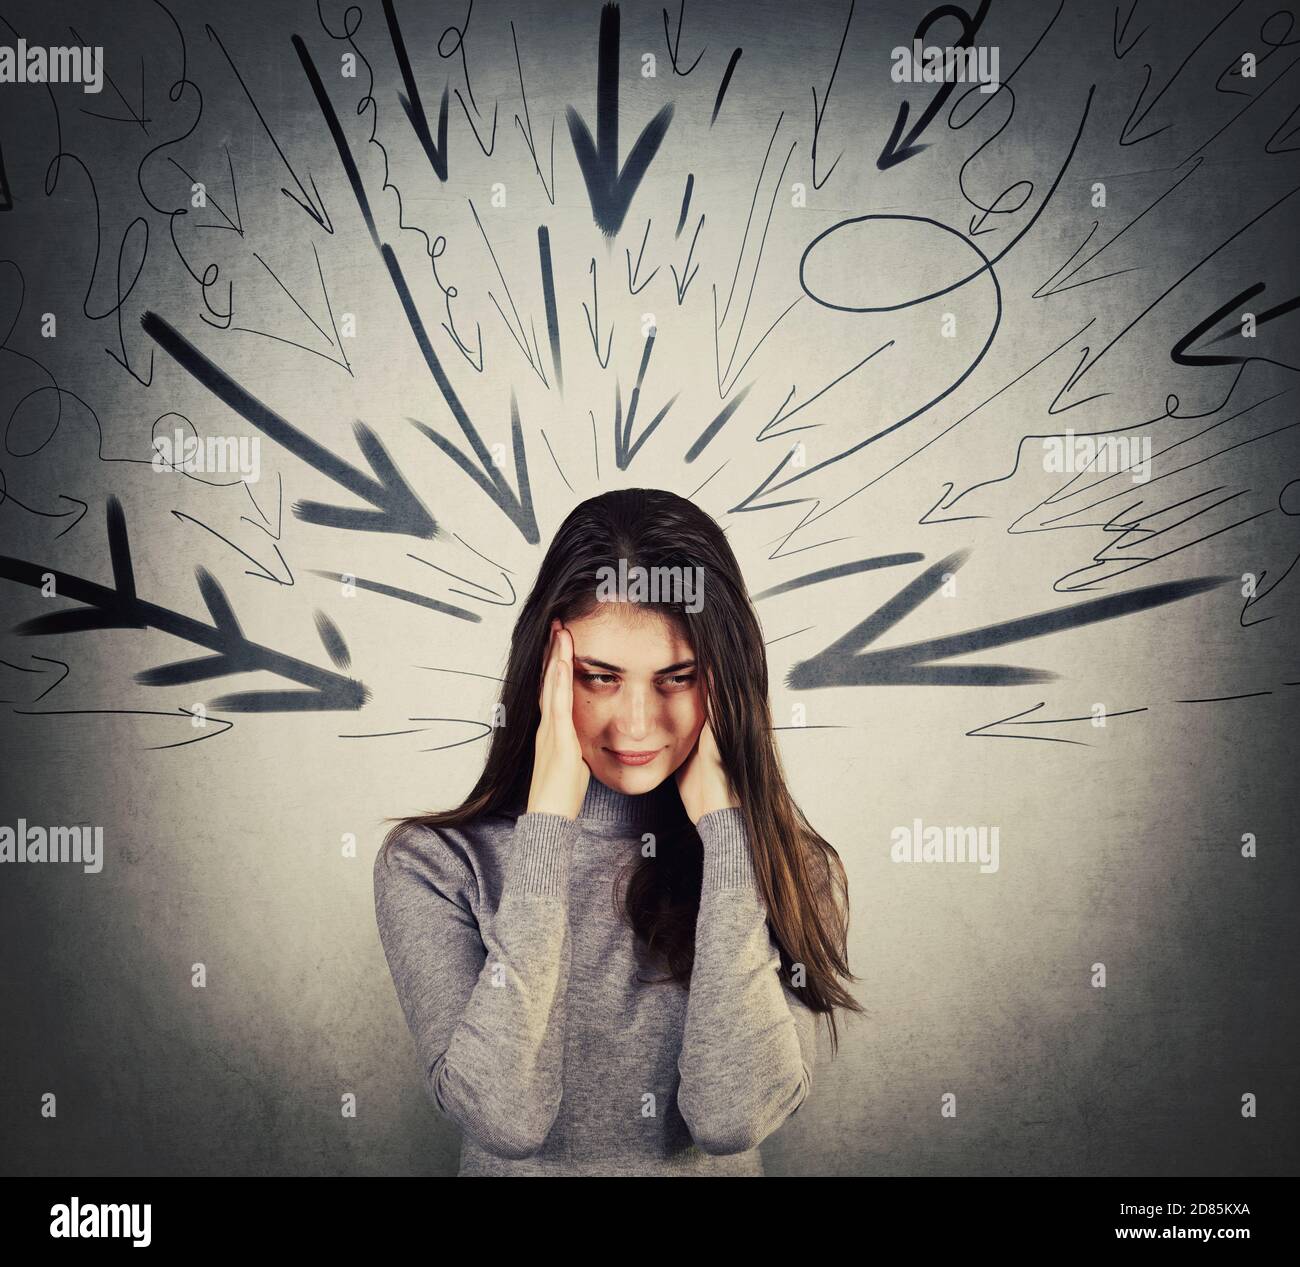 Irritated young woman covering ears with hands, looks displeased, refuse to listen. Teenager girl being under pressure as multiple arrows points negat Stock Photo